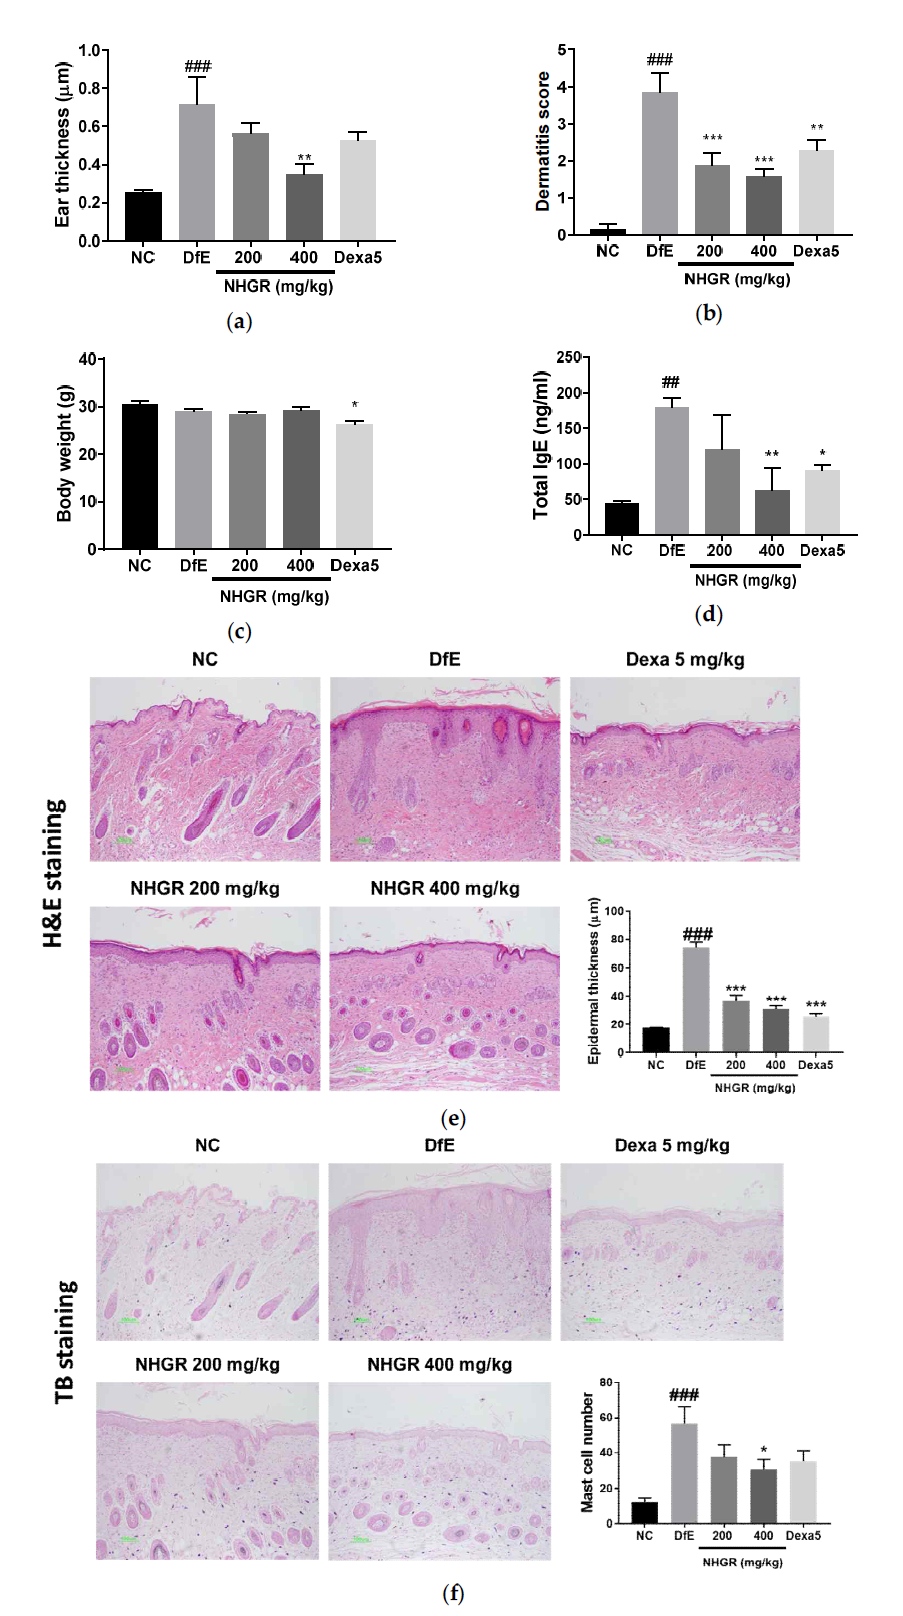 The effects of Siraitia grosvenorii residual extract (NHGR) on the development of atopic dermatitis in NC/Nga mice. (a) Ear thickness, (b) Dermatitis severity score, (c) Body weight, and (d) Serum total IgE levels. Dorsal skin sections were stained with (e) Hematoxylin  TB, toluidine blue stain. Values are expressed as means ± SEM (n=7). #p < 0.05 and ### p < 0.001 compared with NC; p<0.05, **p < 0.01 and ***p < 0.001 compared with DfE, as determined by ANOVA followed by multiple comparison tests